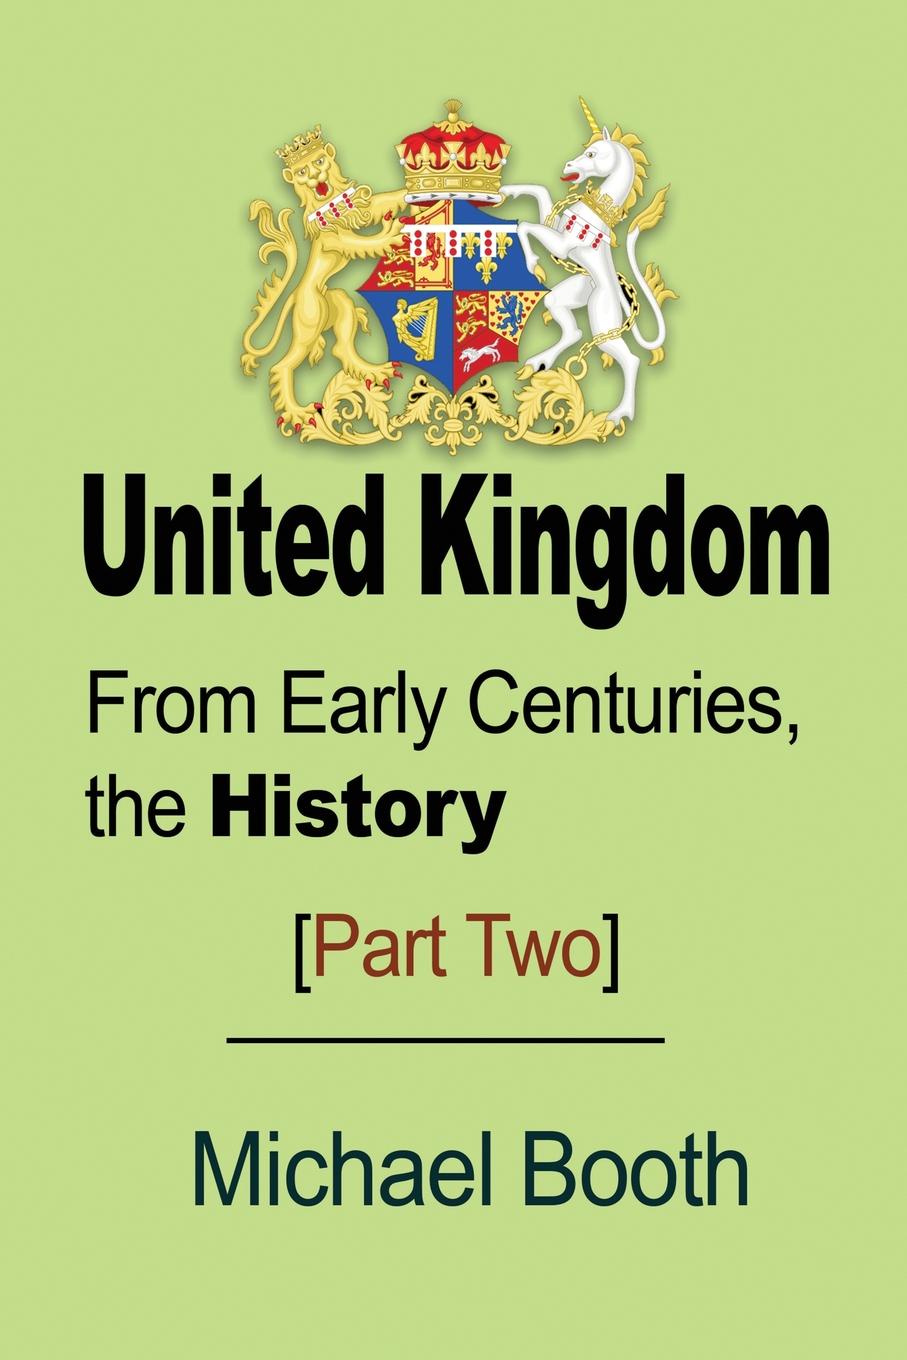 United Kingdom. From Early Centuries, the History